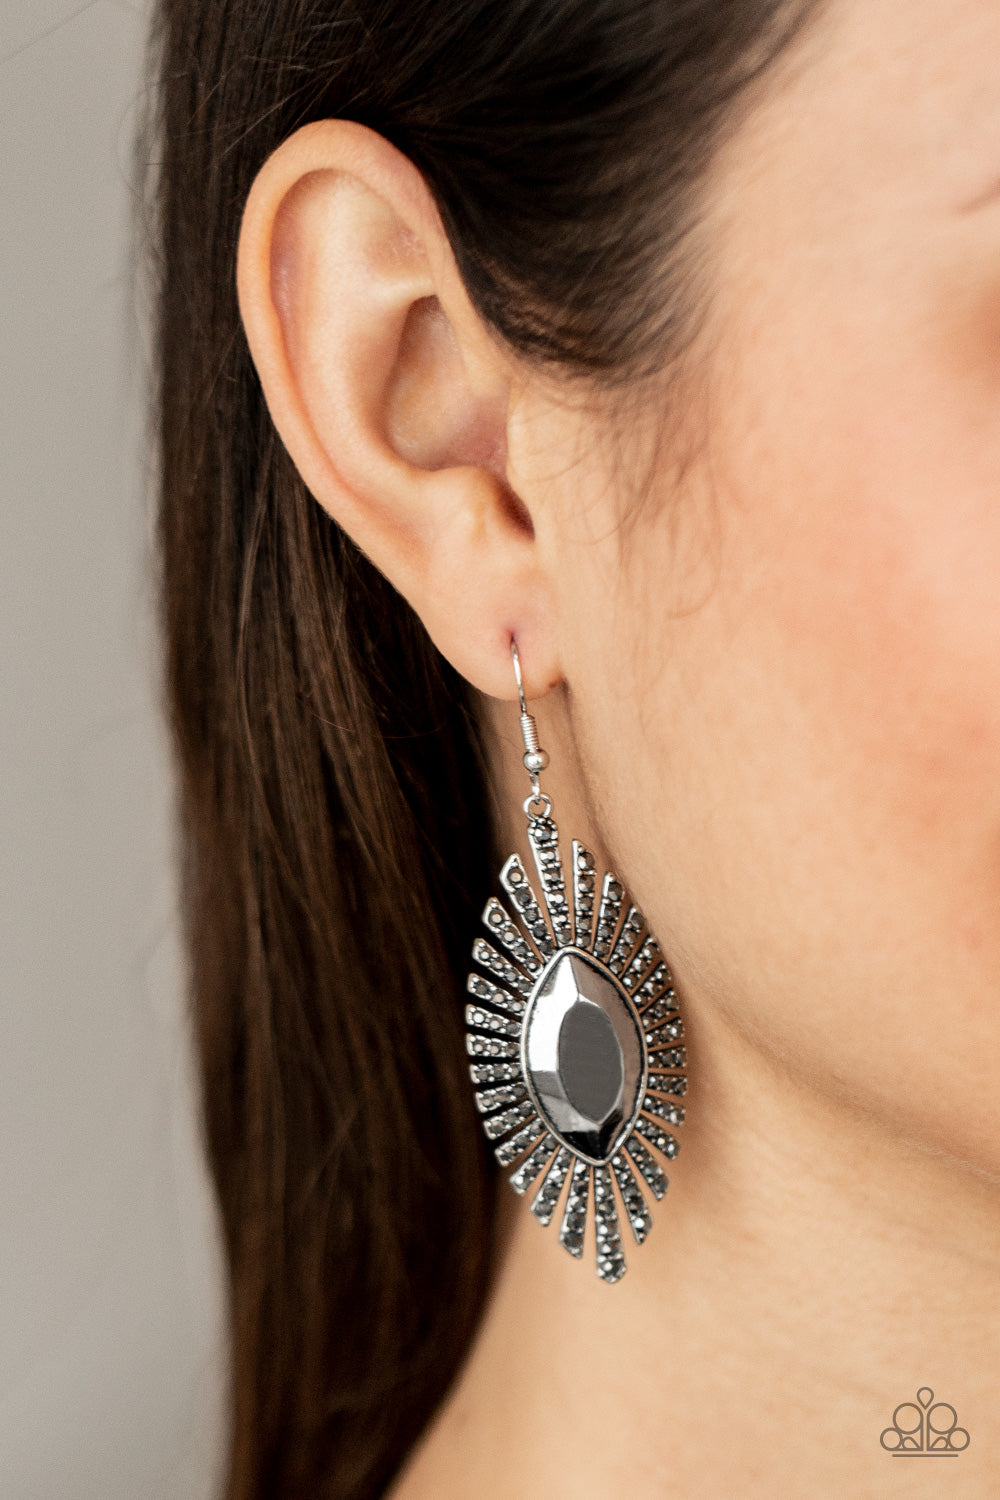 Who Is The FIERCEST Of Them All - Silver Earrings - Princess Glam Shop